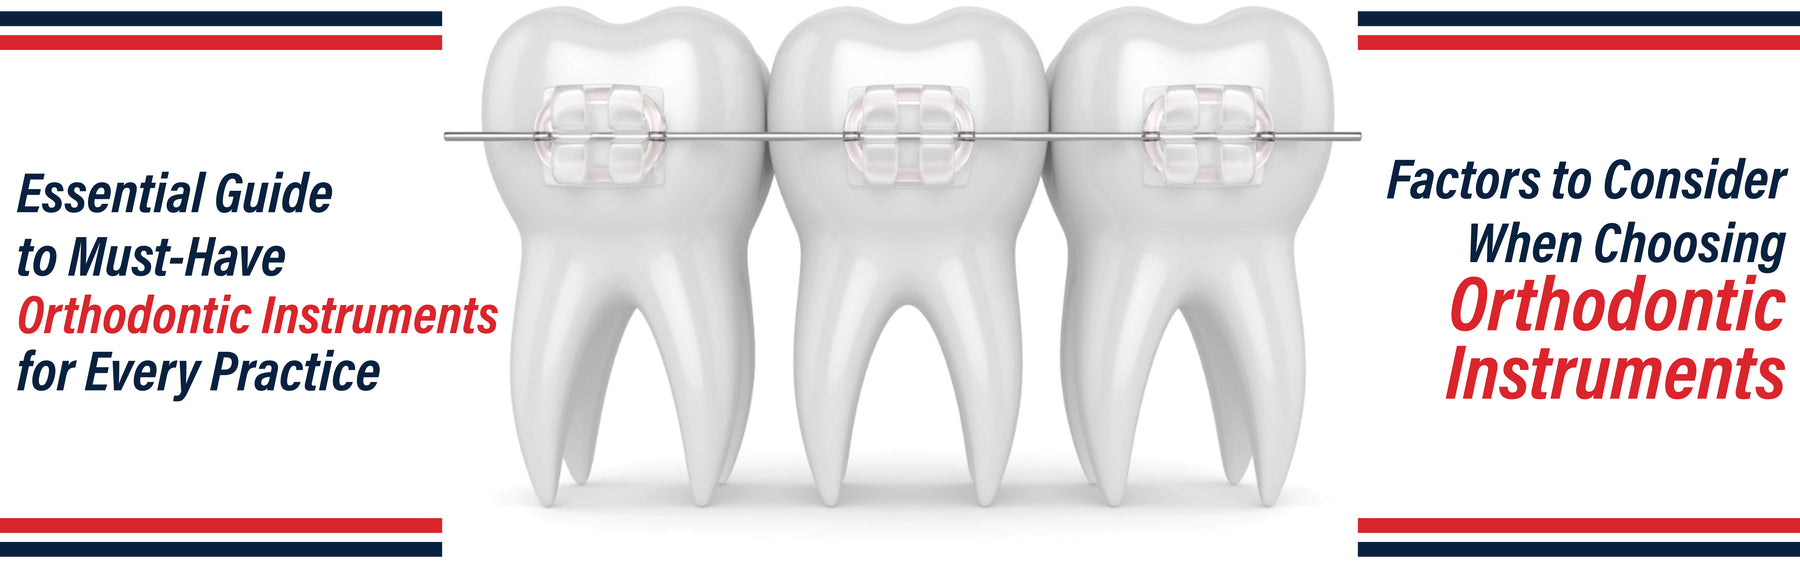 Essential Guide to Must-Have Orthodontic Instruments for Every Practice